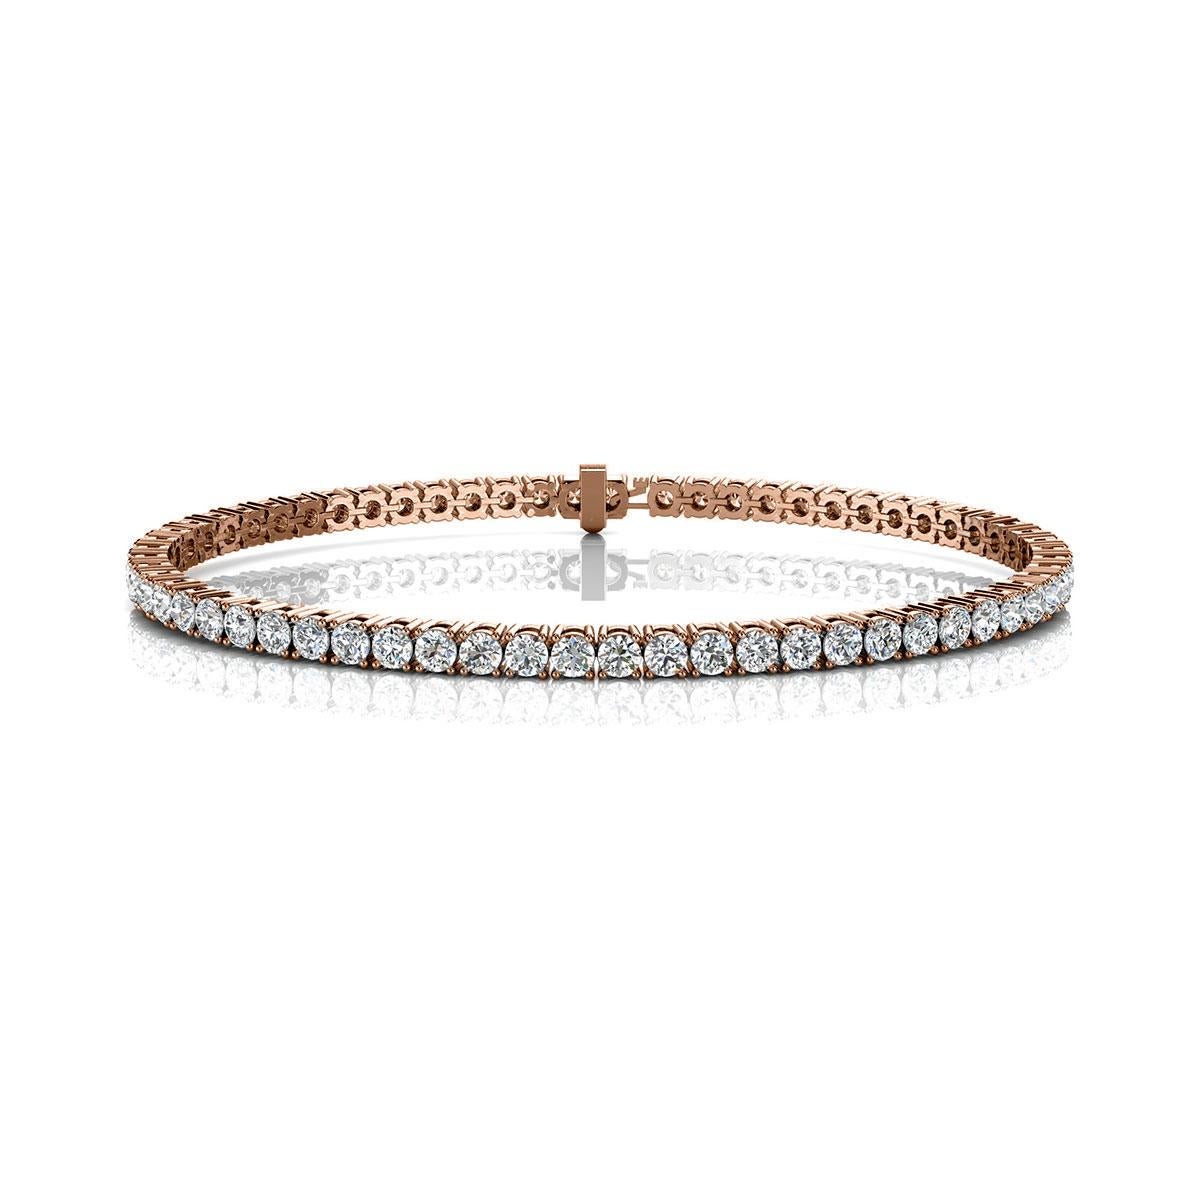 A timeless three prongs diamonds tennis bracelet. Experience the Difference!

Product details: 

Center Gemstone Type: NATURAL DIAMOND
Center Gemstone Color: WHITE
Center Gemstone Shape: ROUND
Center Diamond Carat Weight: 2
Metal: 14K Rose